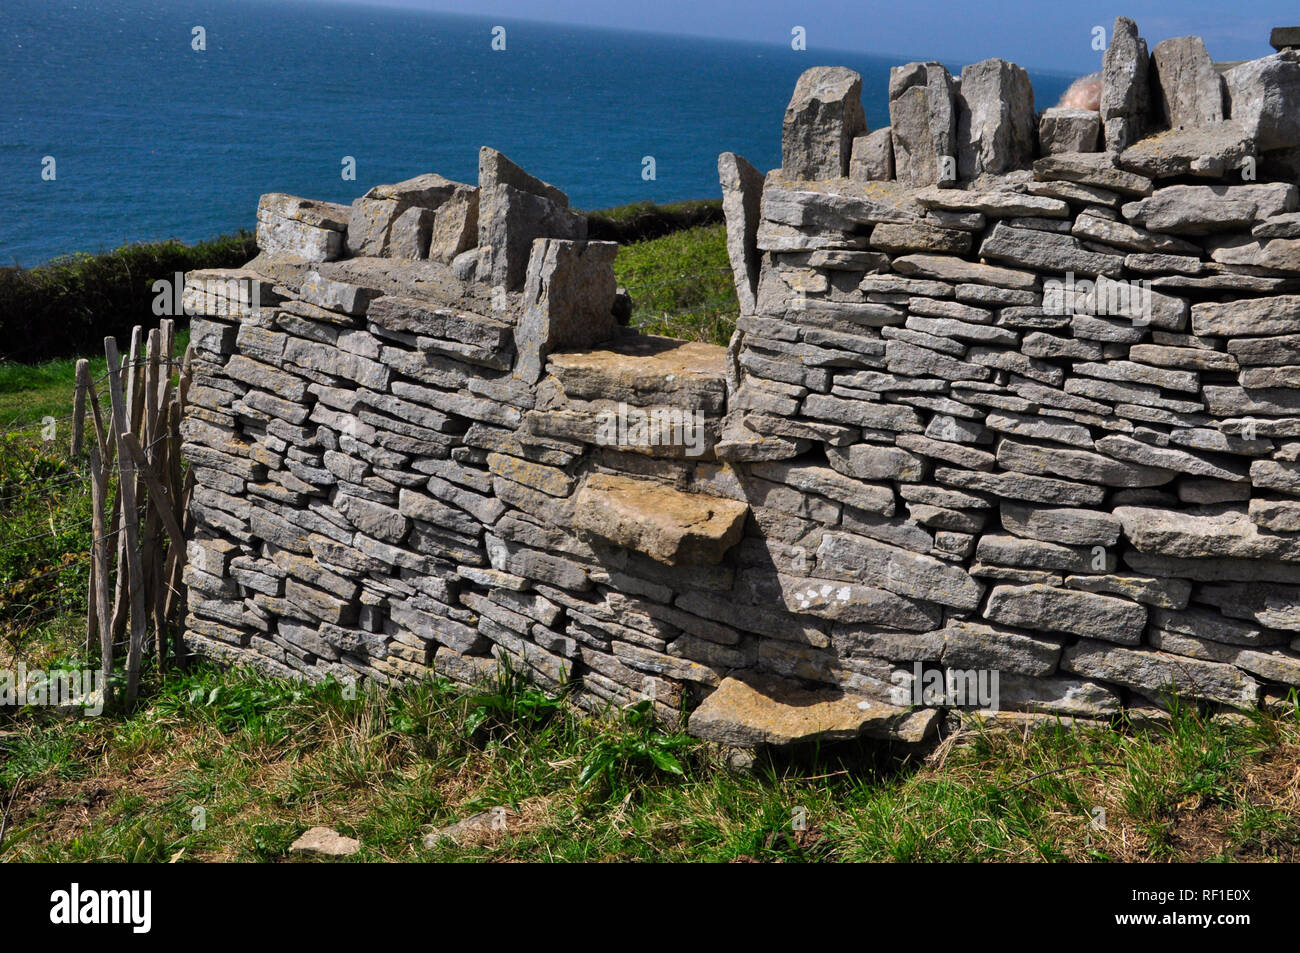 Dry stone wall with stile built in on the Isle of Purbeck, Dorset. Rough limestone wall divides sloping coastal fields with the sea in the background. Stock Photo